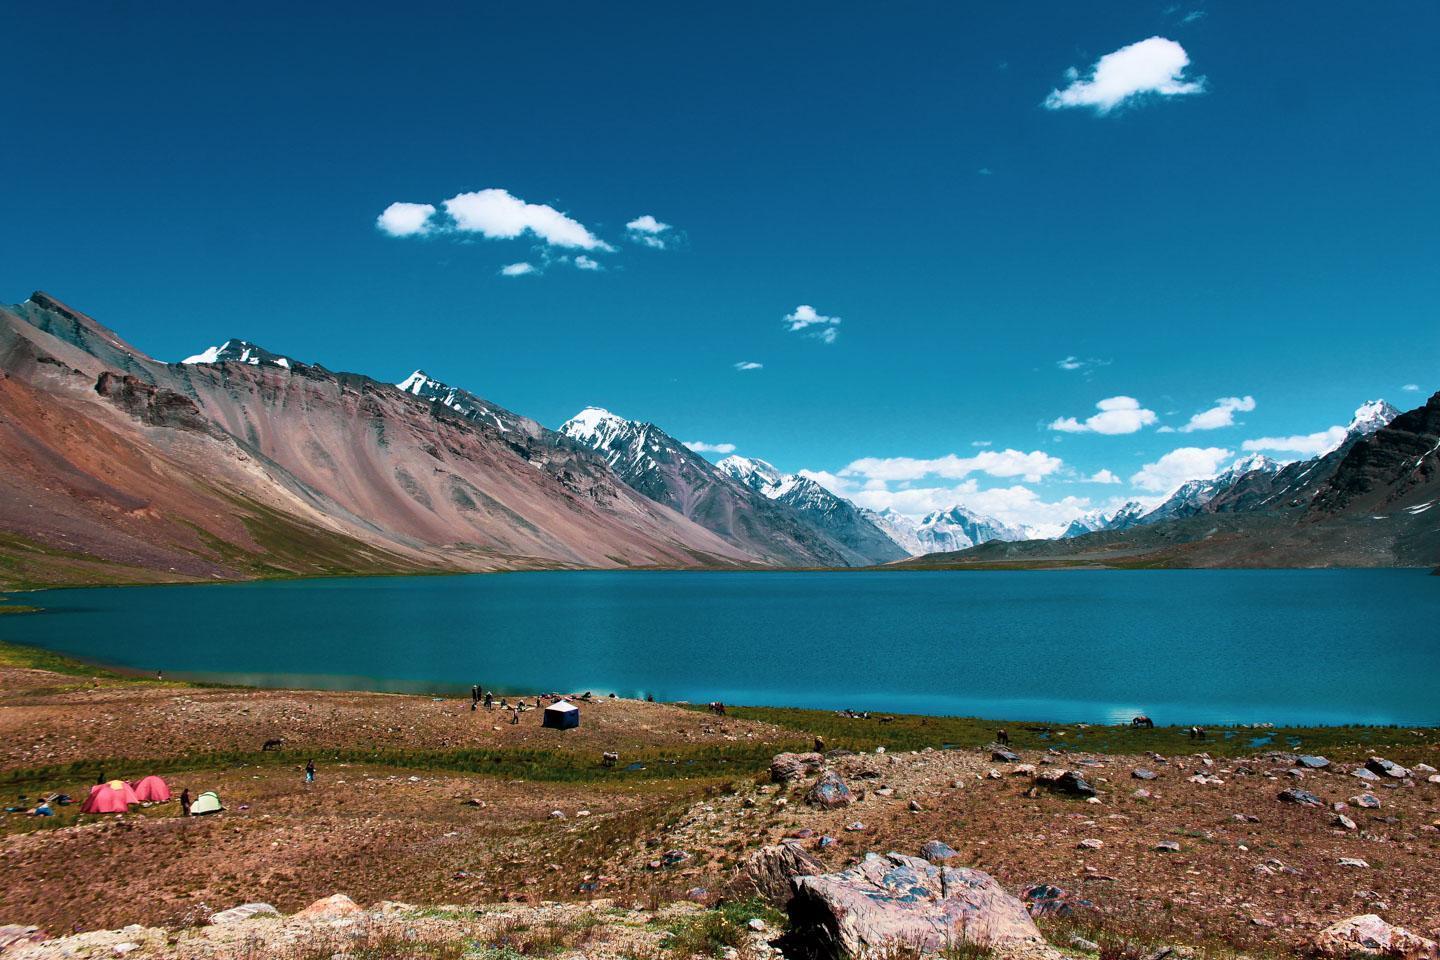 The picturesque beauty of Karambar lake